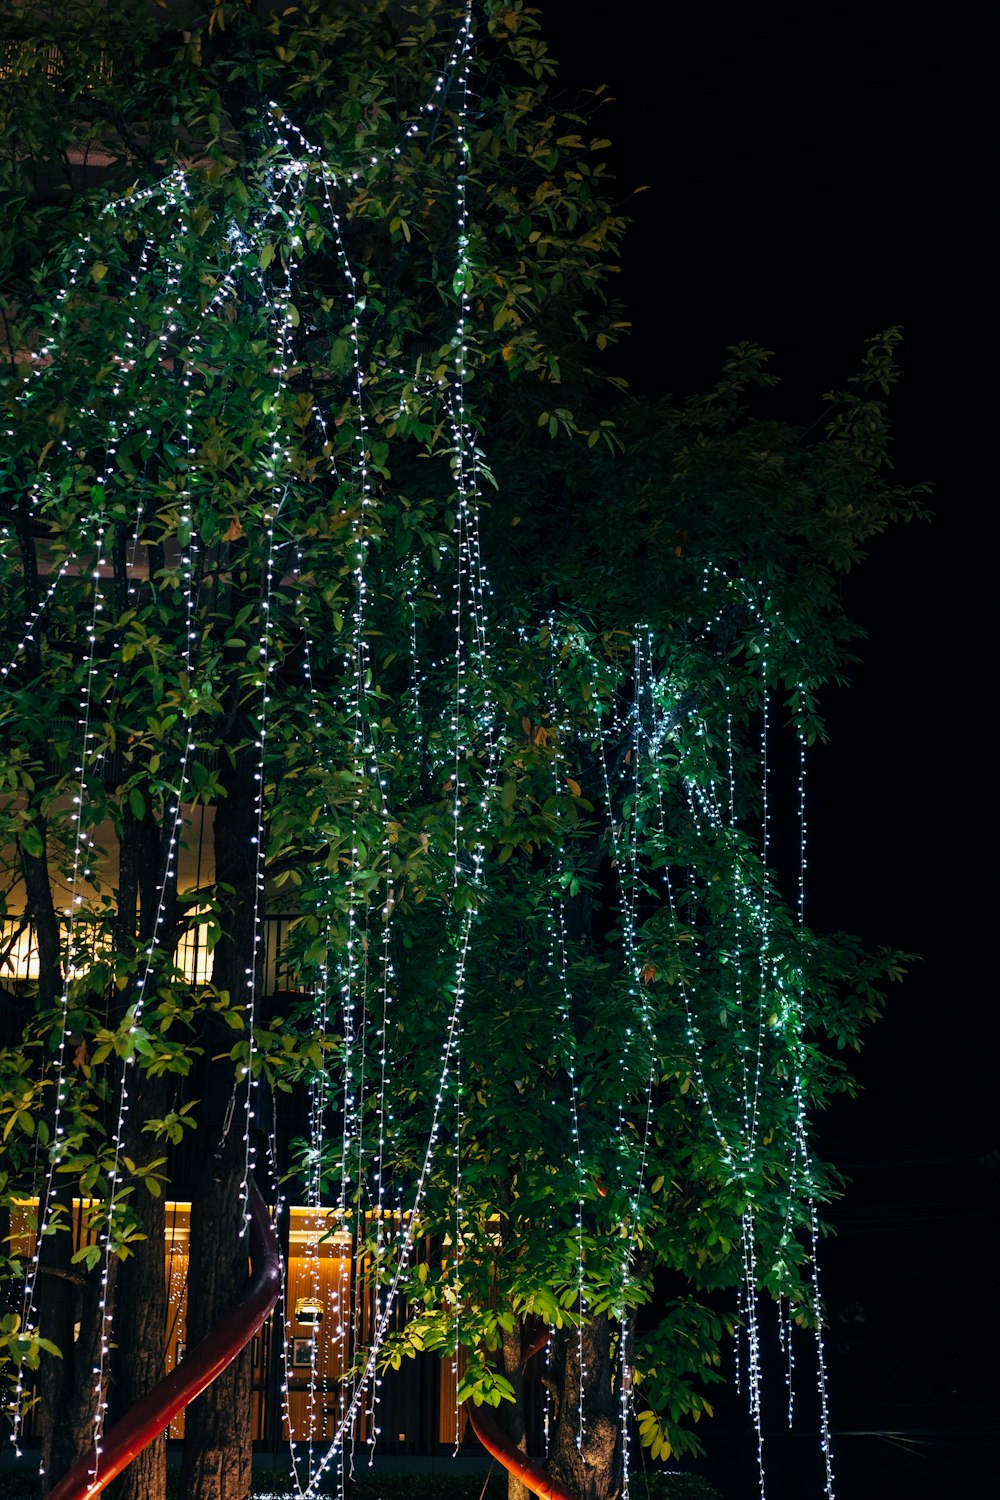 green trees with string lights during night time